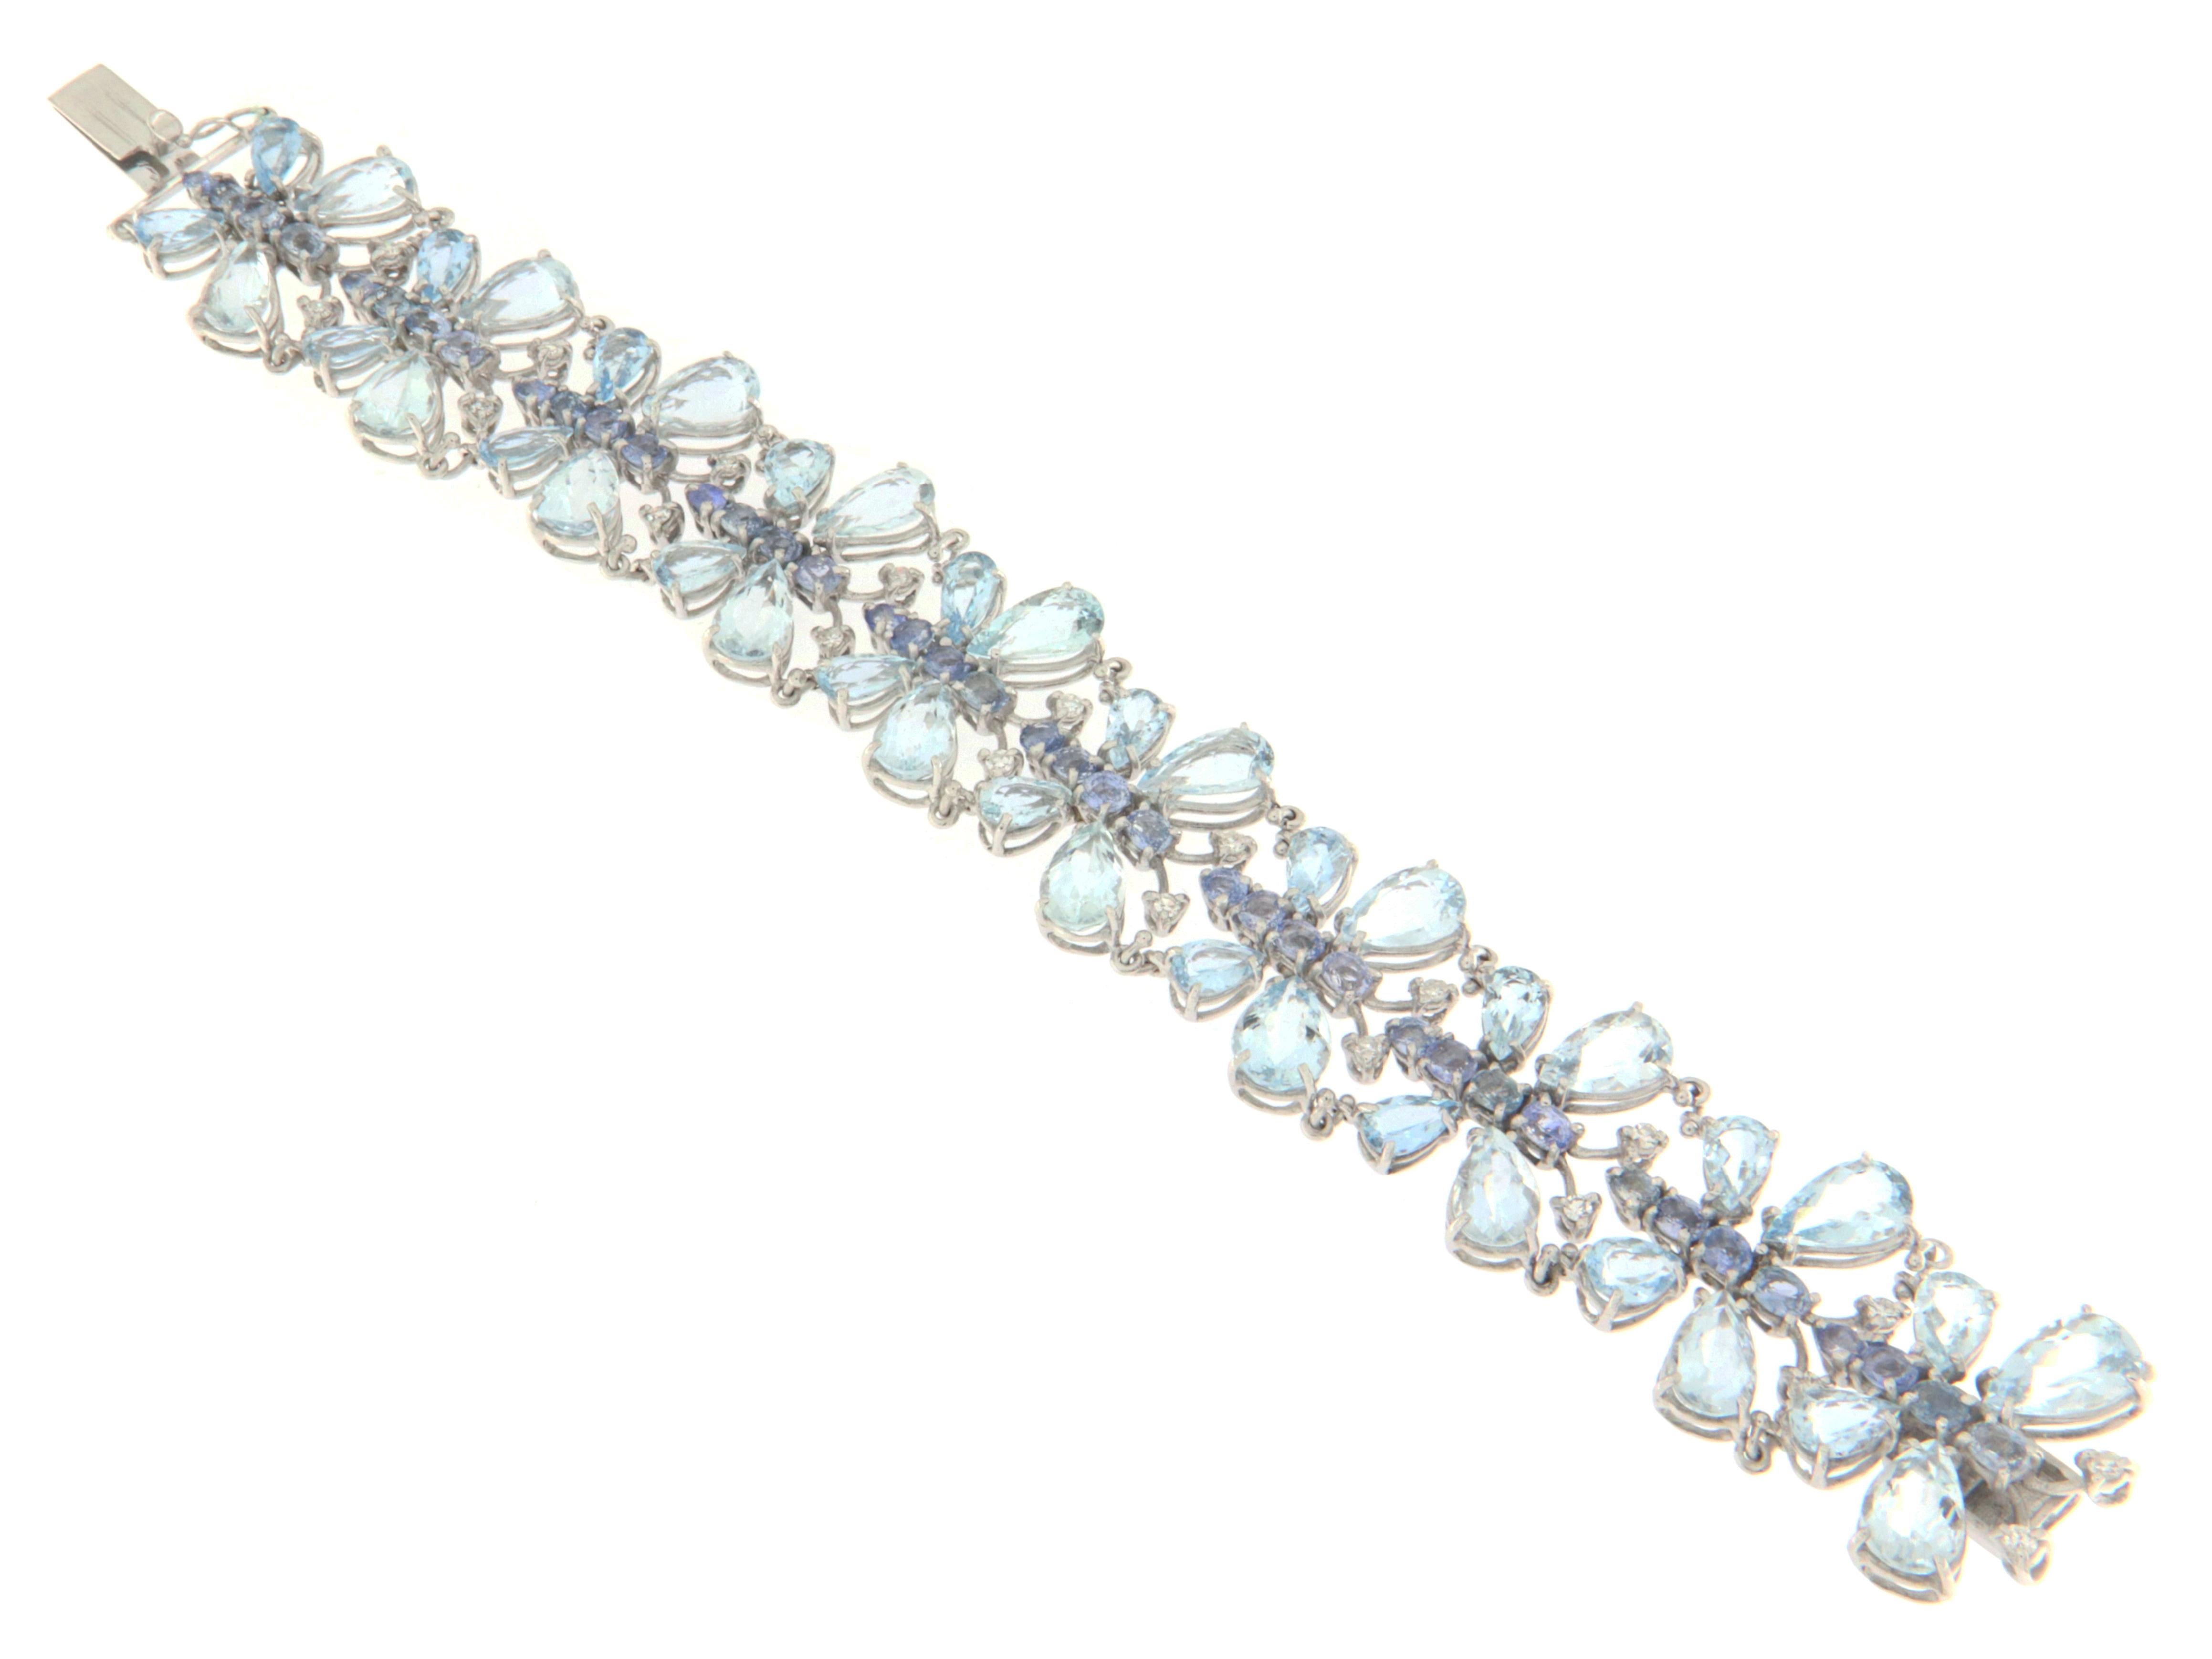 This sophisticated bracelet in 18-karat white gold is a celebration of natural beauty and high jewelry craftsmanship. Elegant and bright, the bracelet is adorned with numerous Brazilian aquamarine drops, each selected for its clear blue hue that